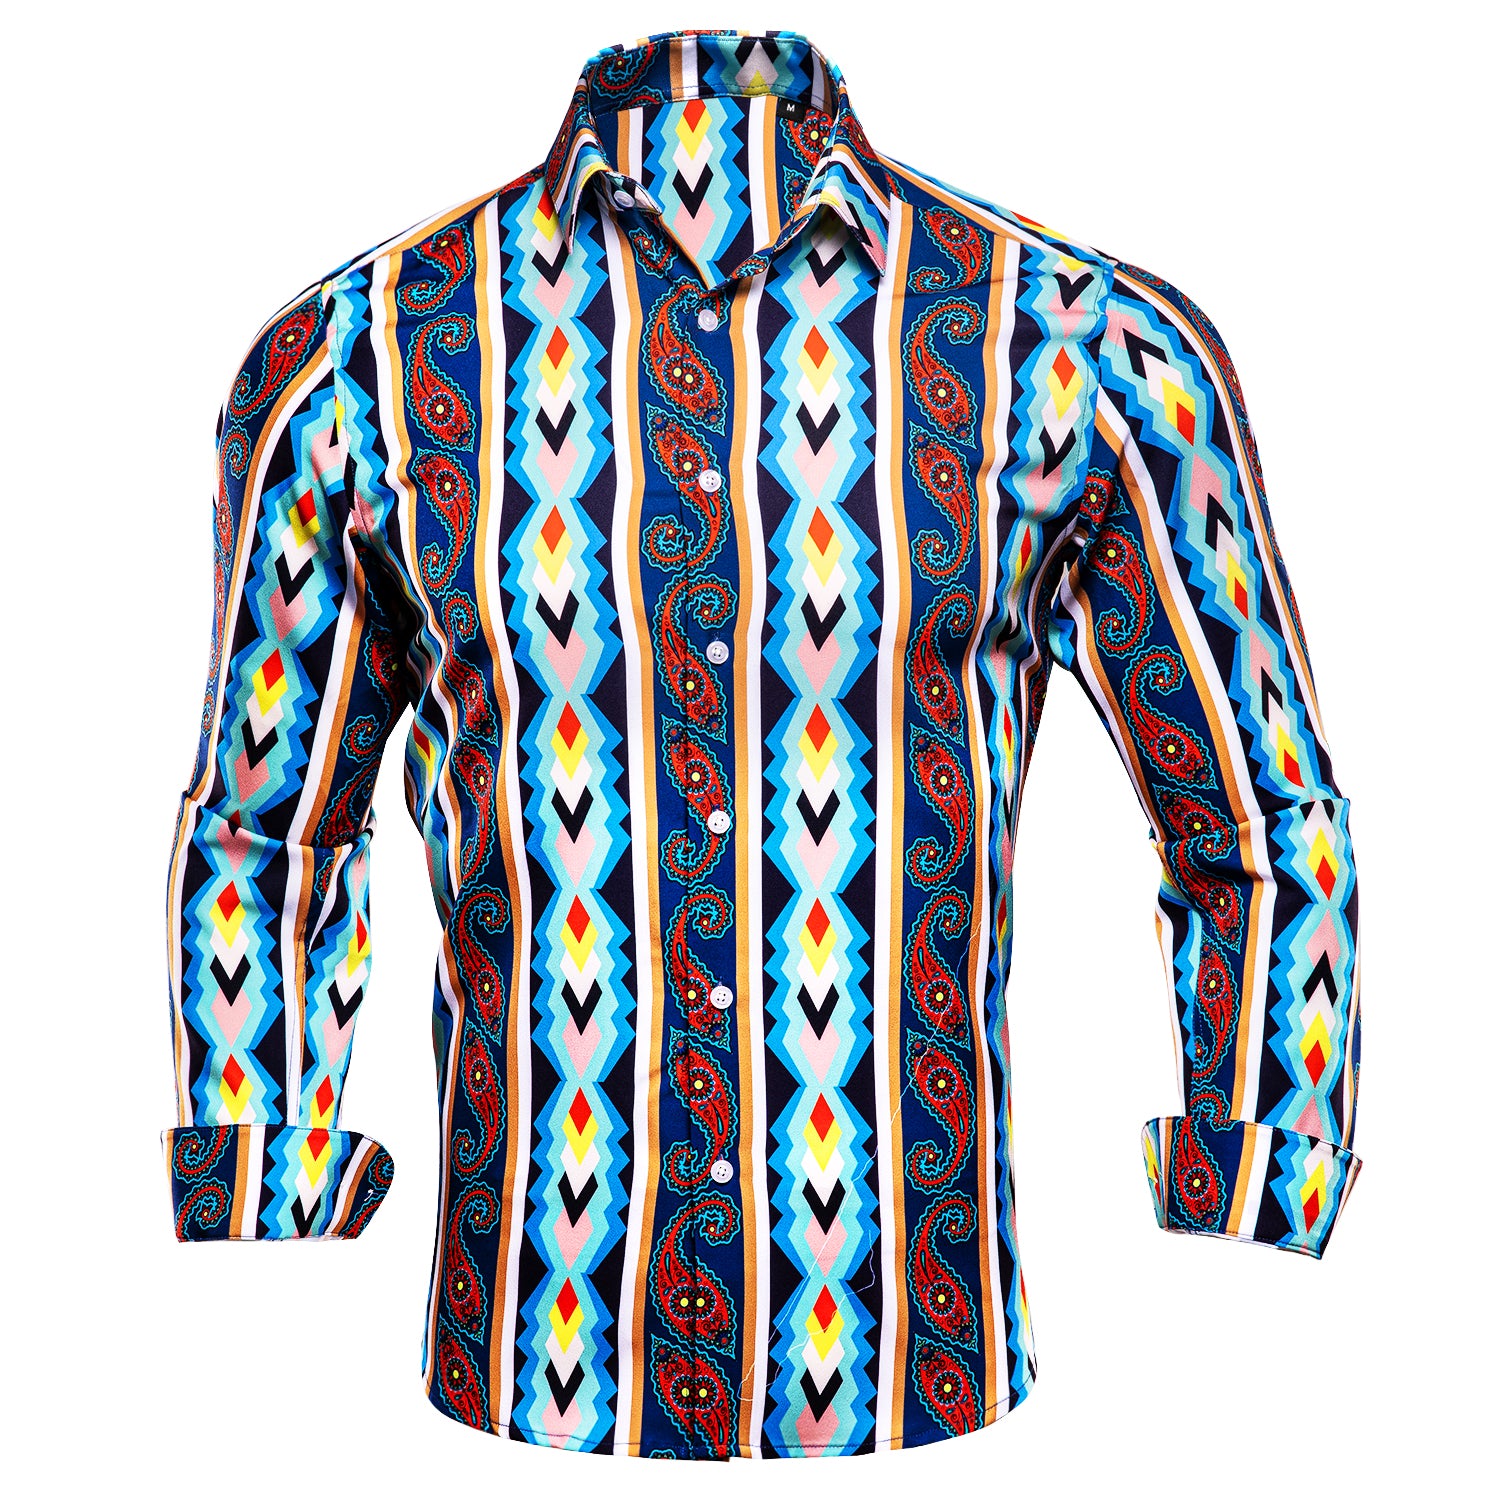 New Colorful Striped Print Novelty Men's Shirt